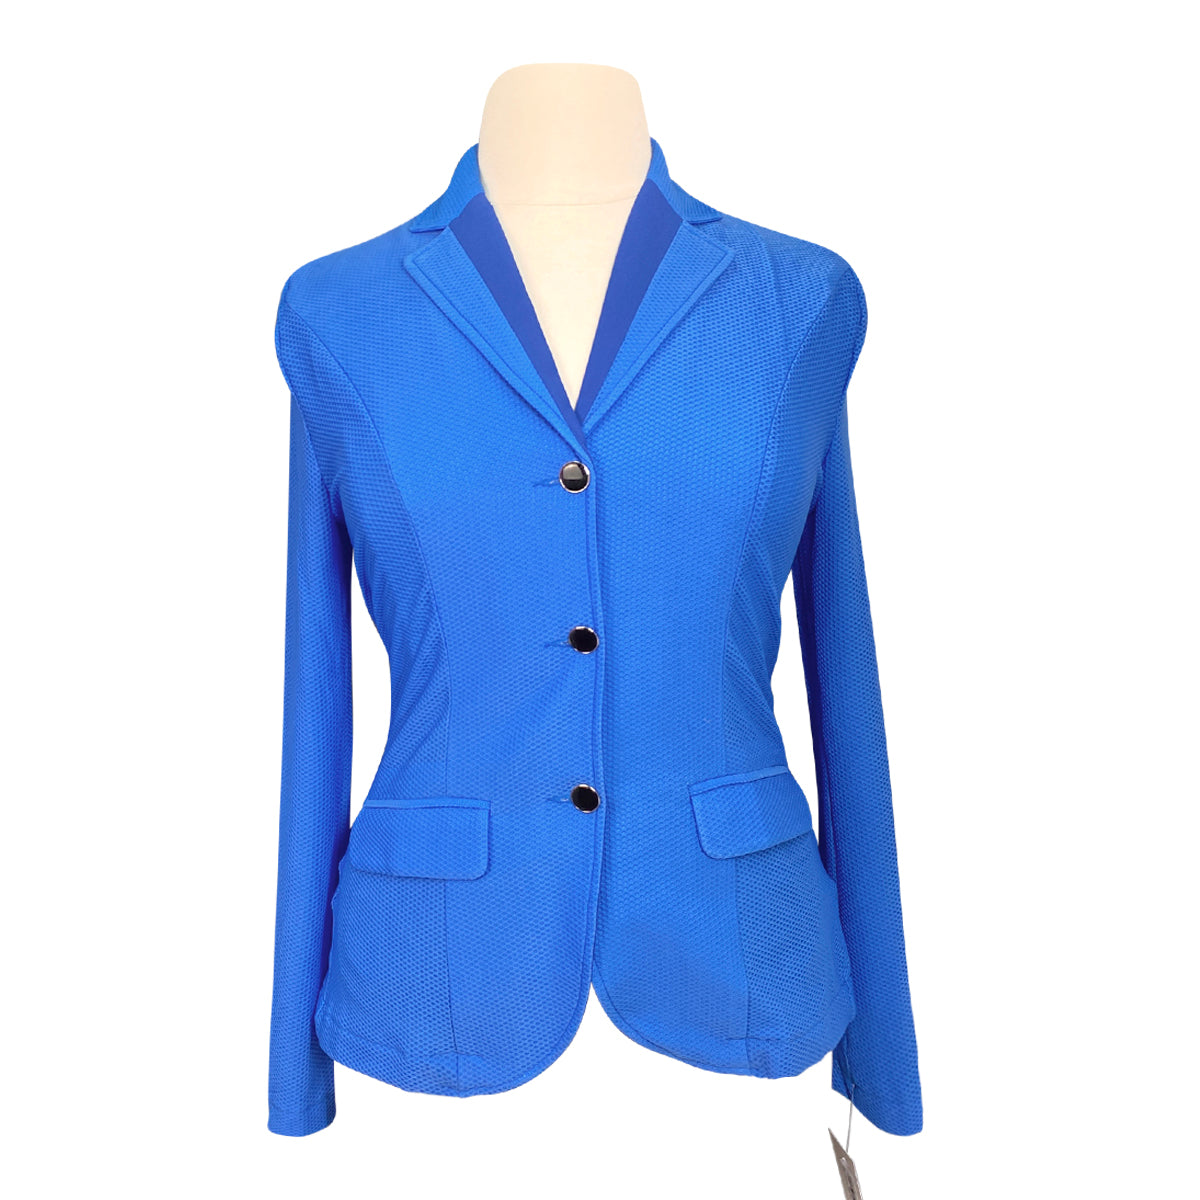 Amore Equestrian 'Aire' Show Jacket in Royal Blue